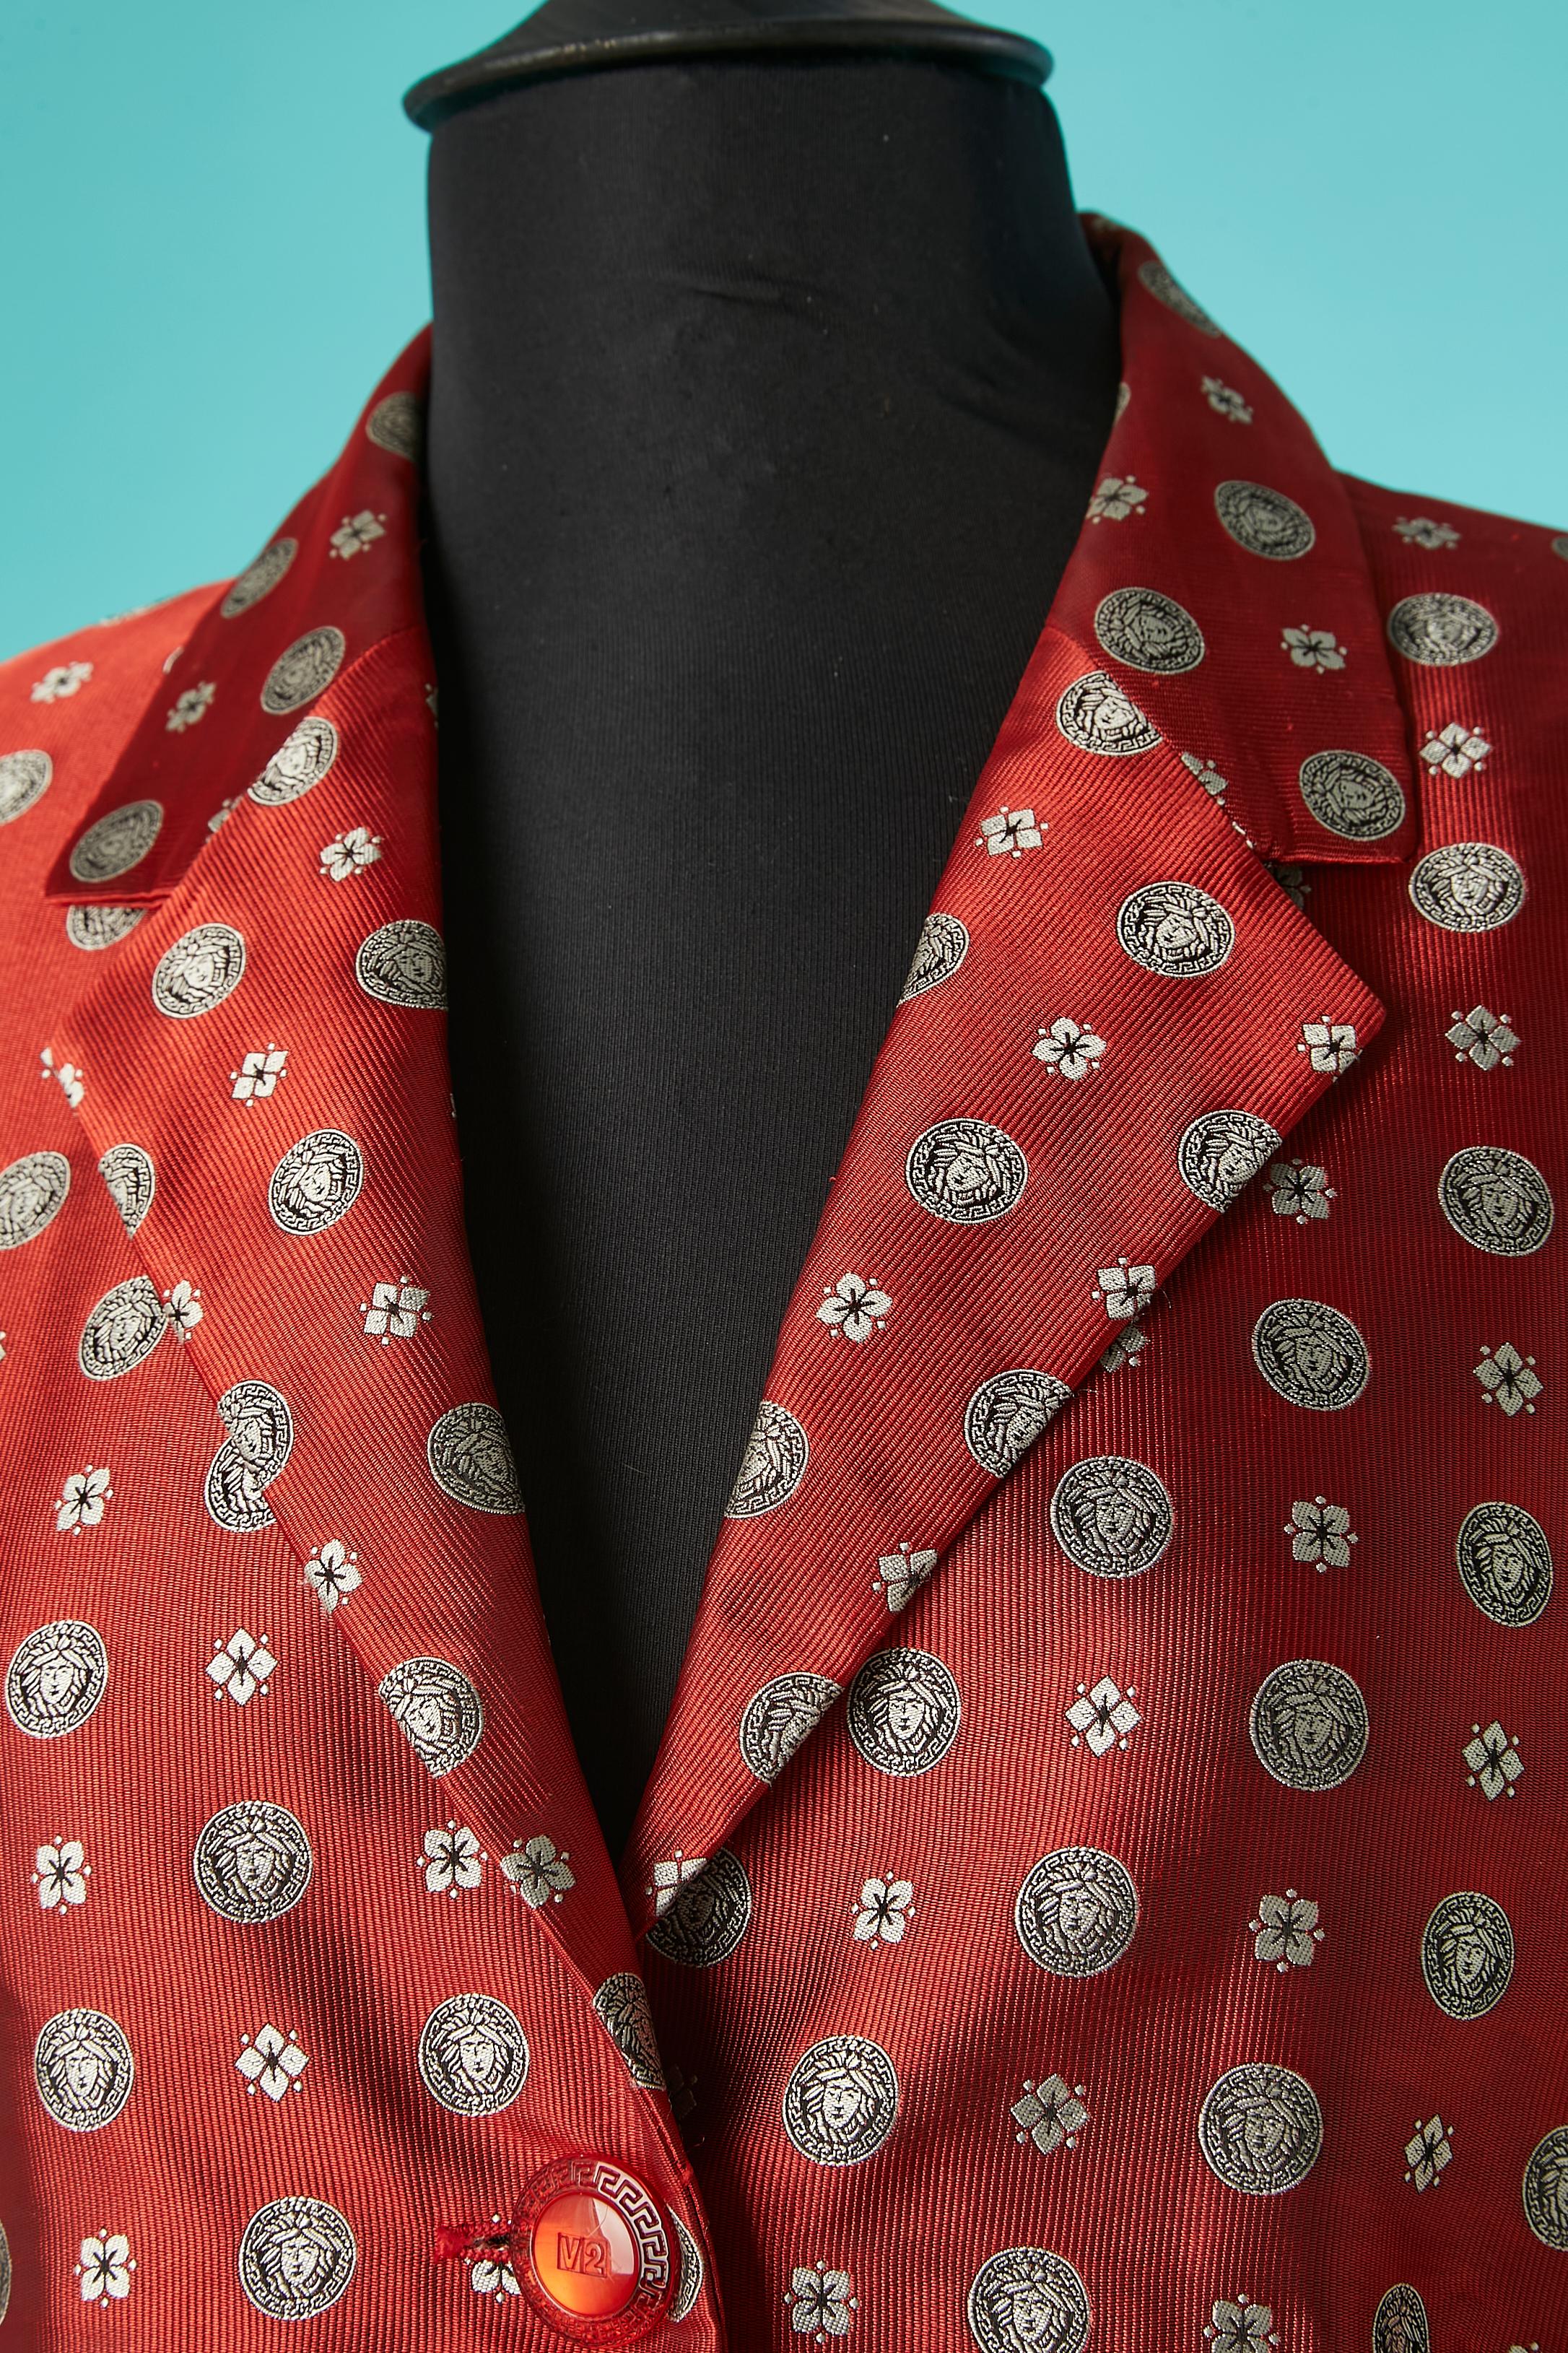 Red jacquard single-breasted jacket with Medusa and flower pattern. Branded 